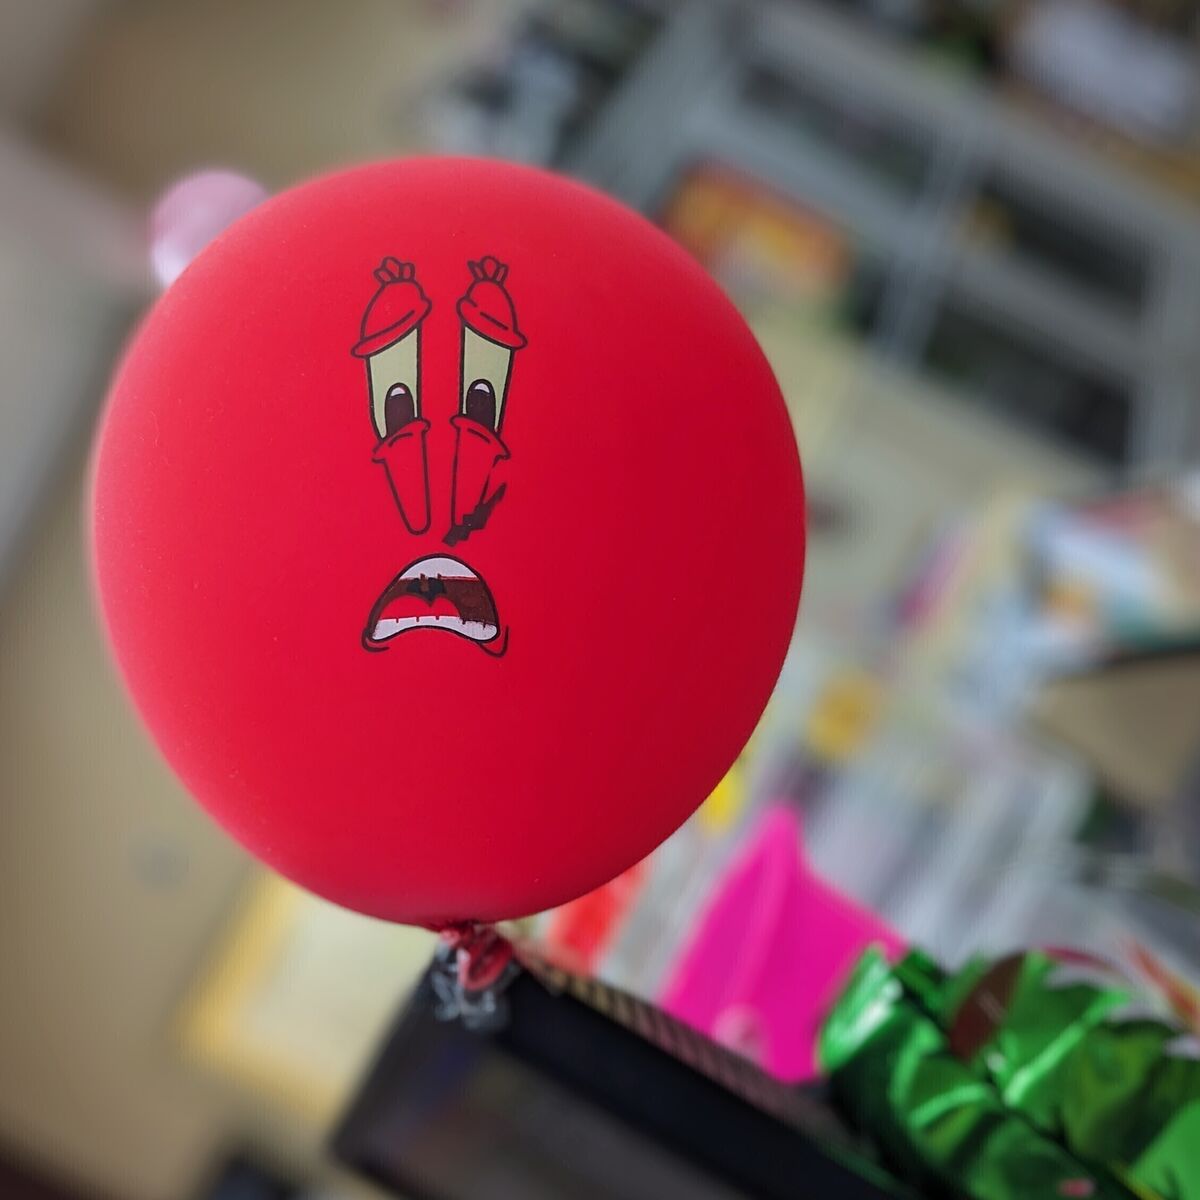 A red balloon of Mr. Krabs from SpongeBob with an agonizing look on his face.